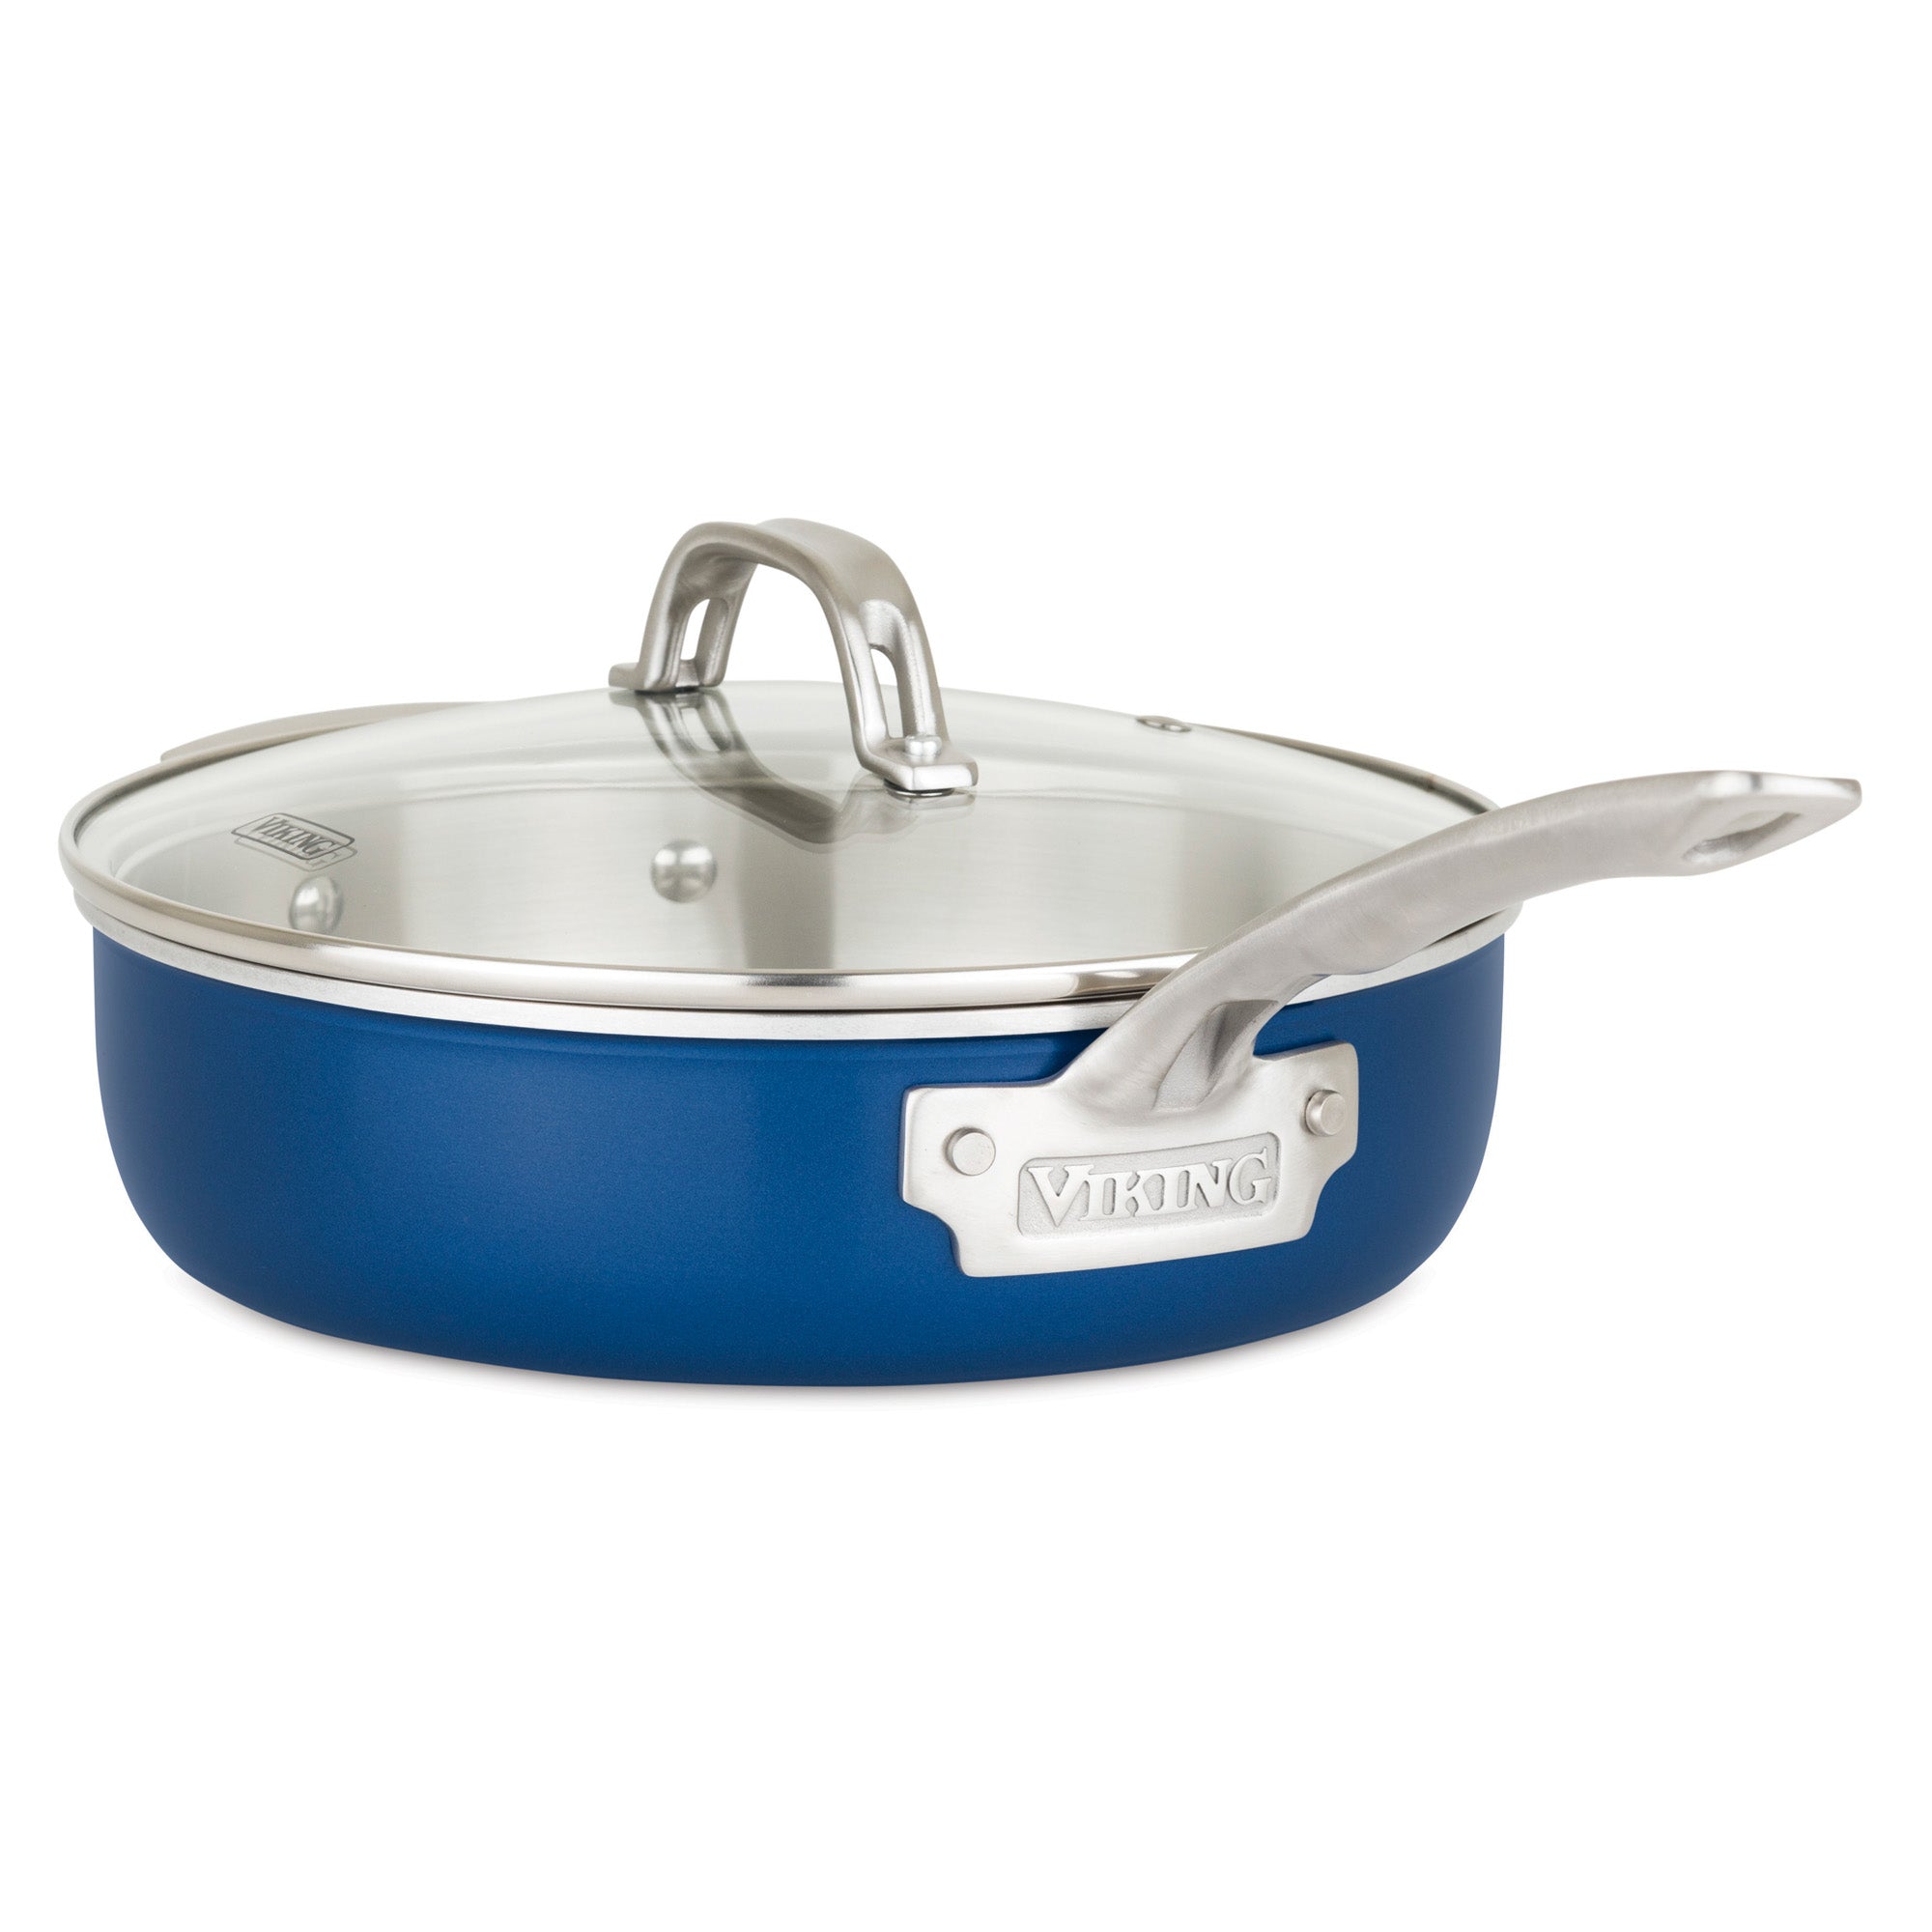 Viking Multi-Ply 2-Ply 11-Piece Blue Cookware Set with Glass Lids